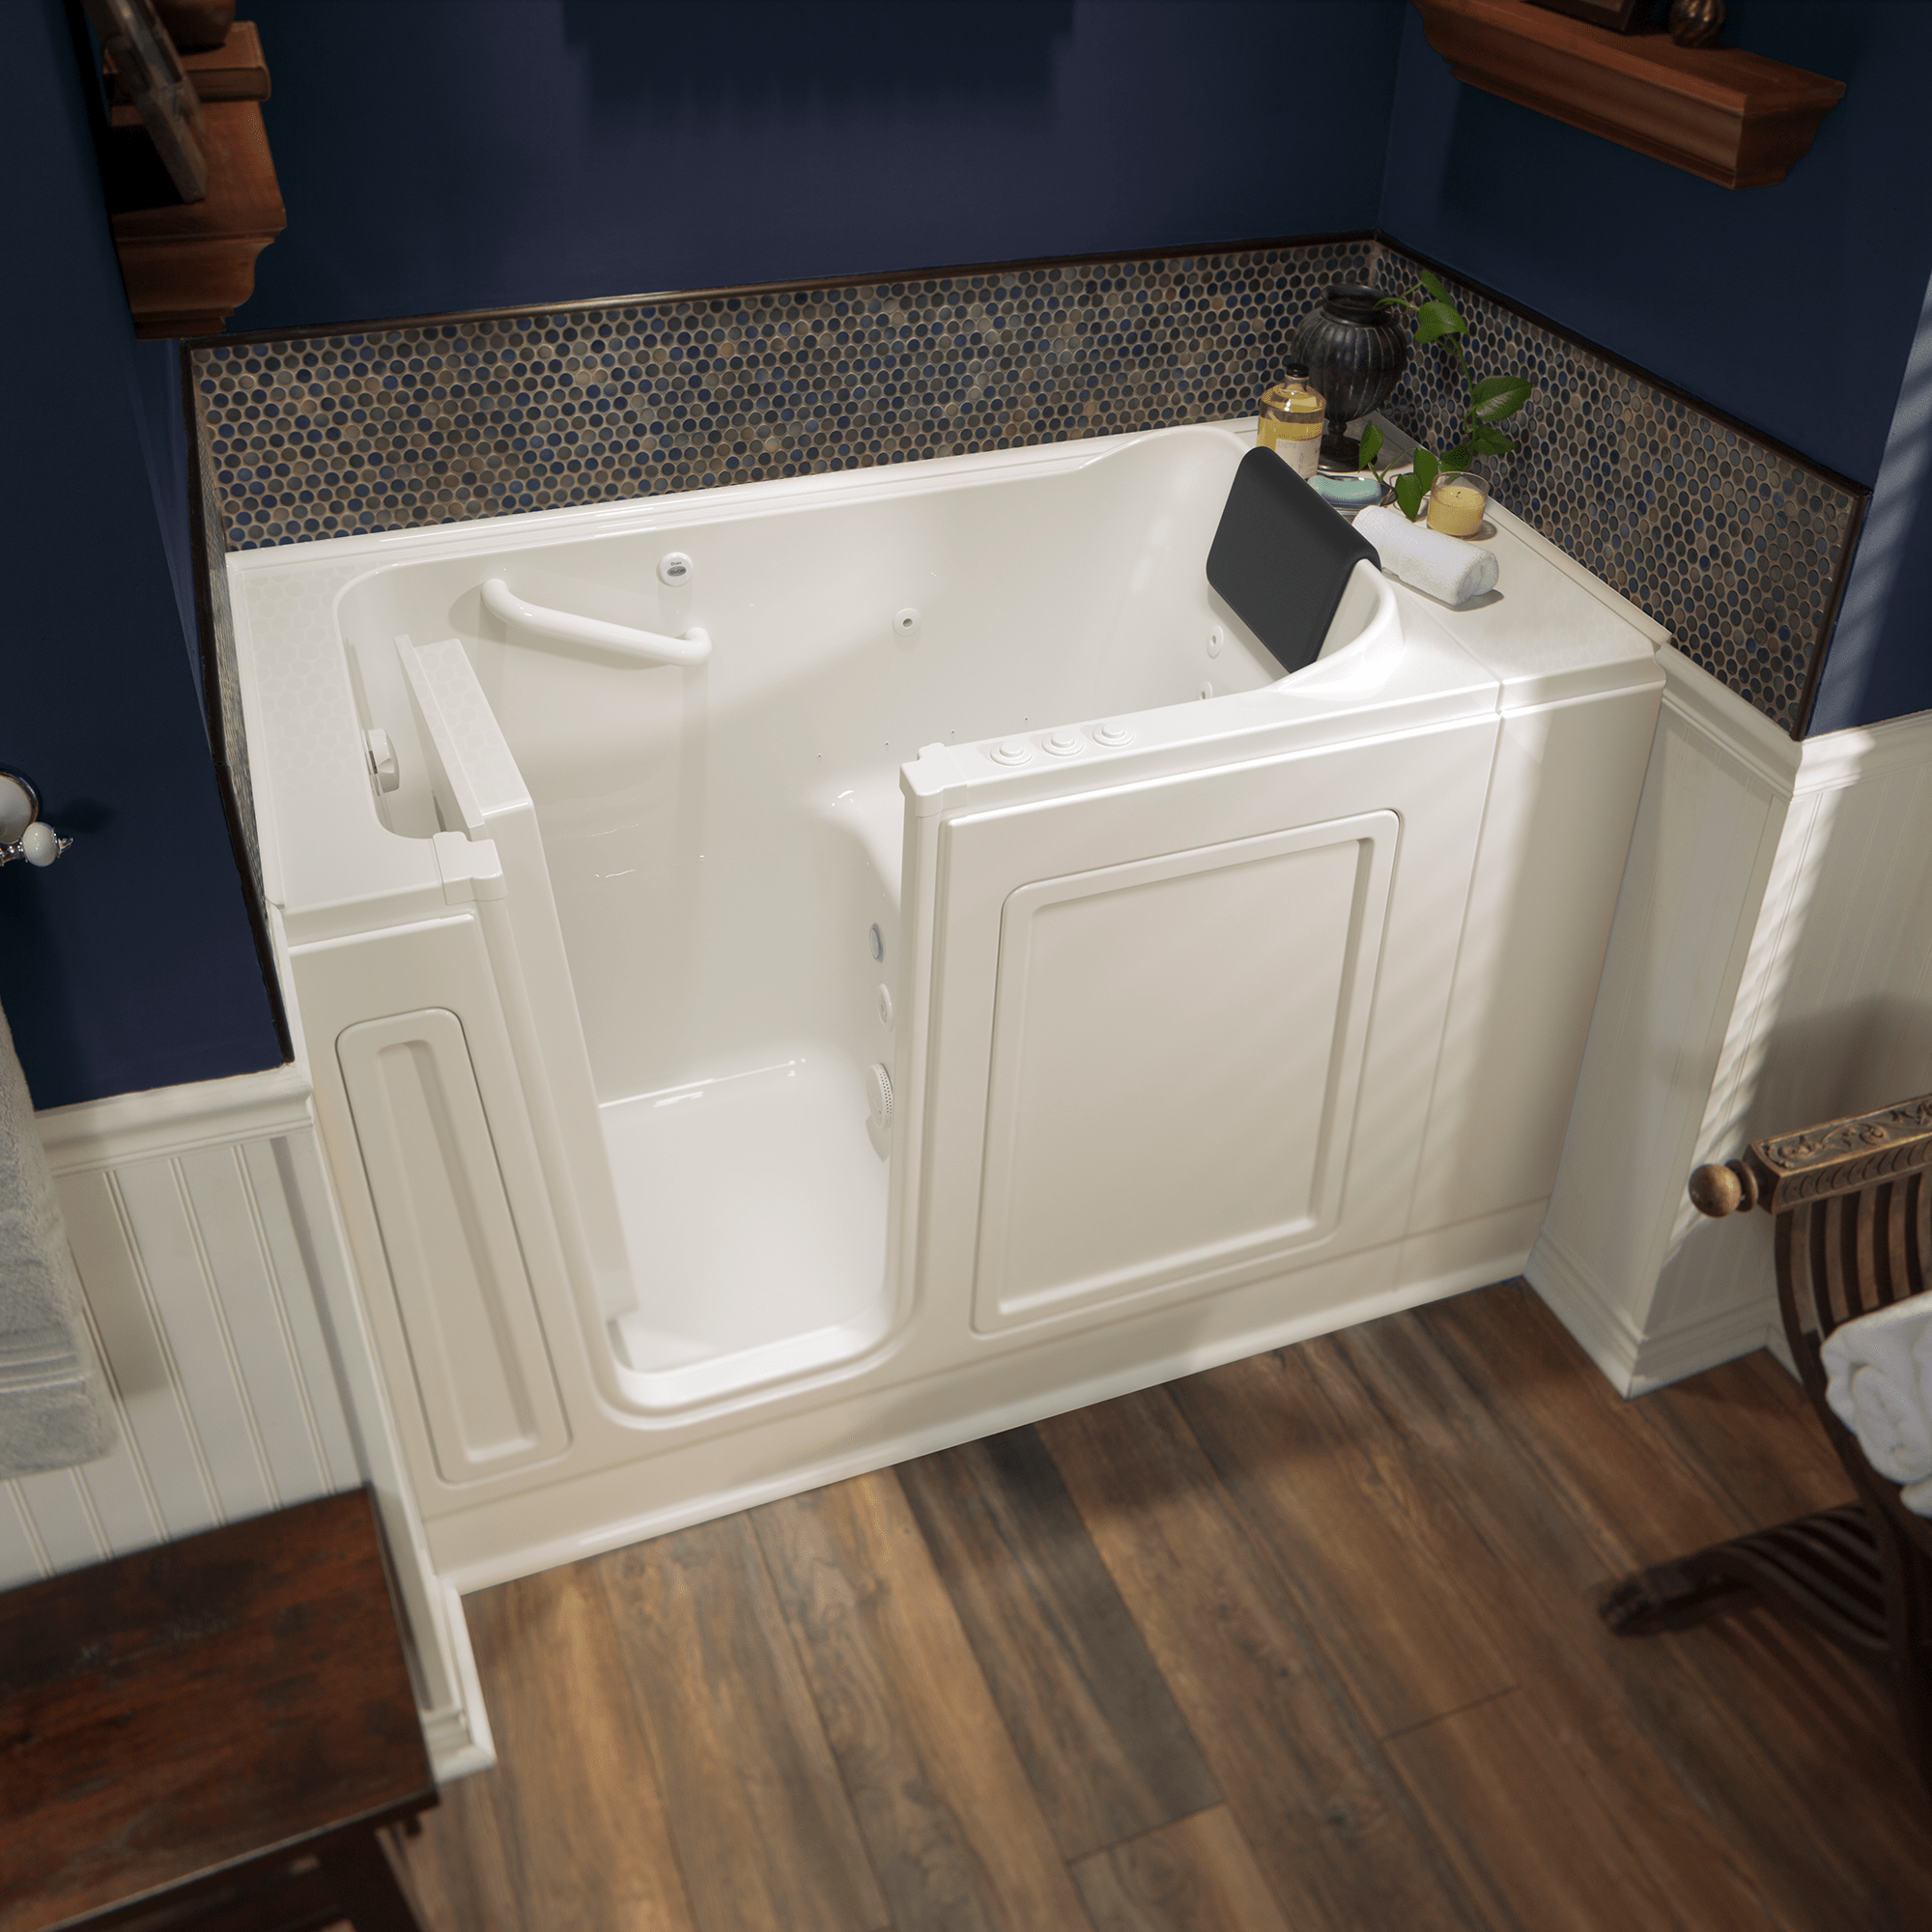 Acrylic Luxury Series 28 x 48-Inch Walk-in Tub With Combination Air Spa and Whirlpool Systems - Left-Hand Drain